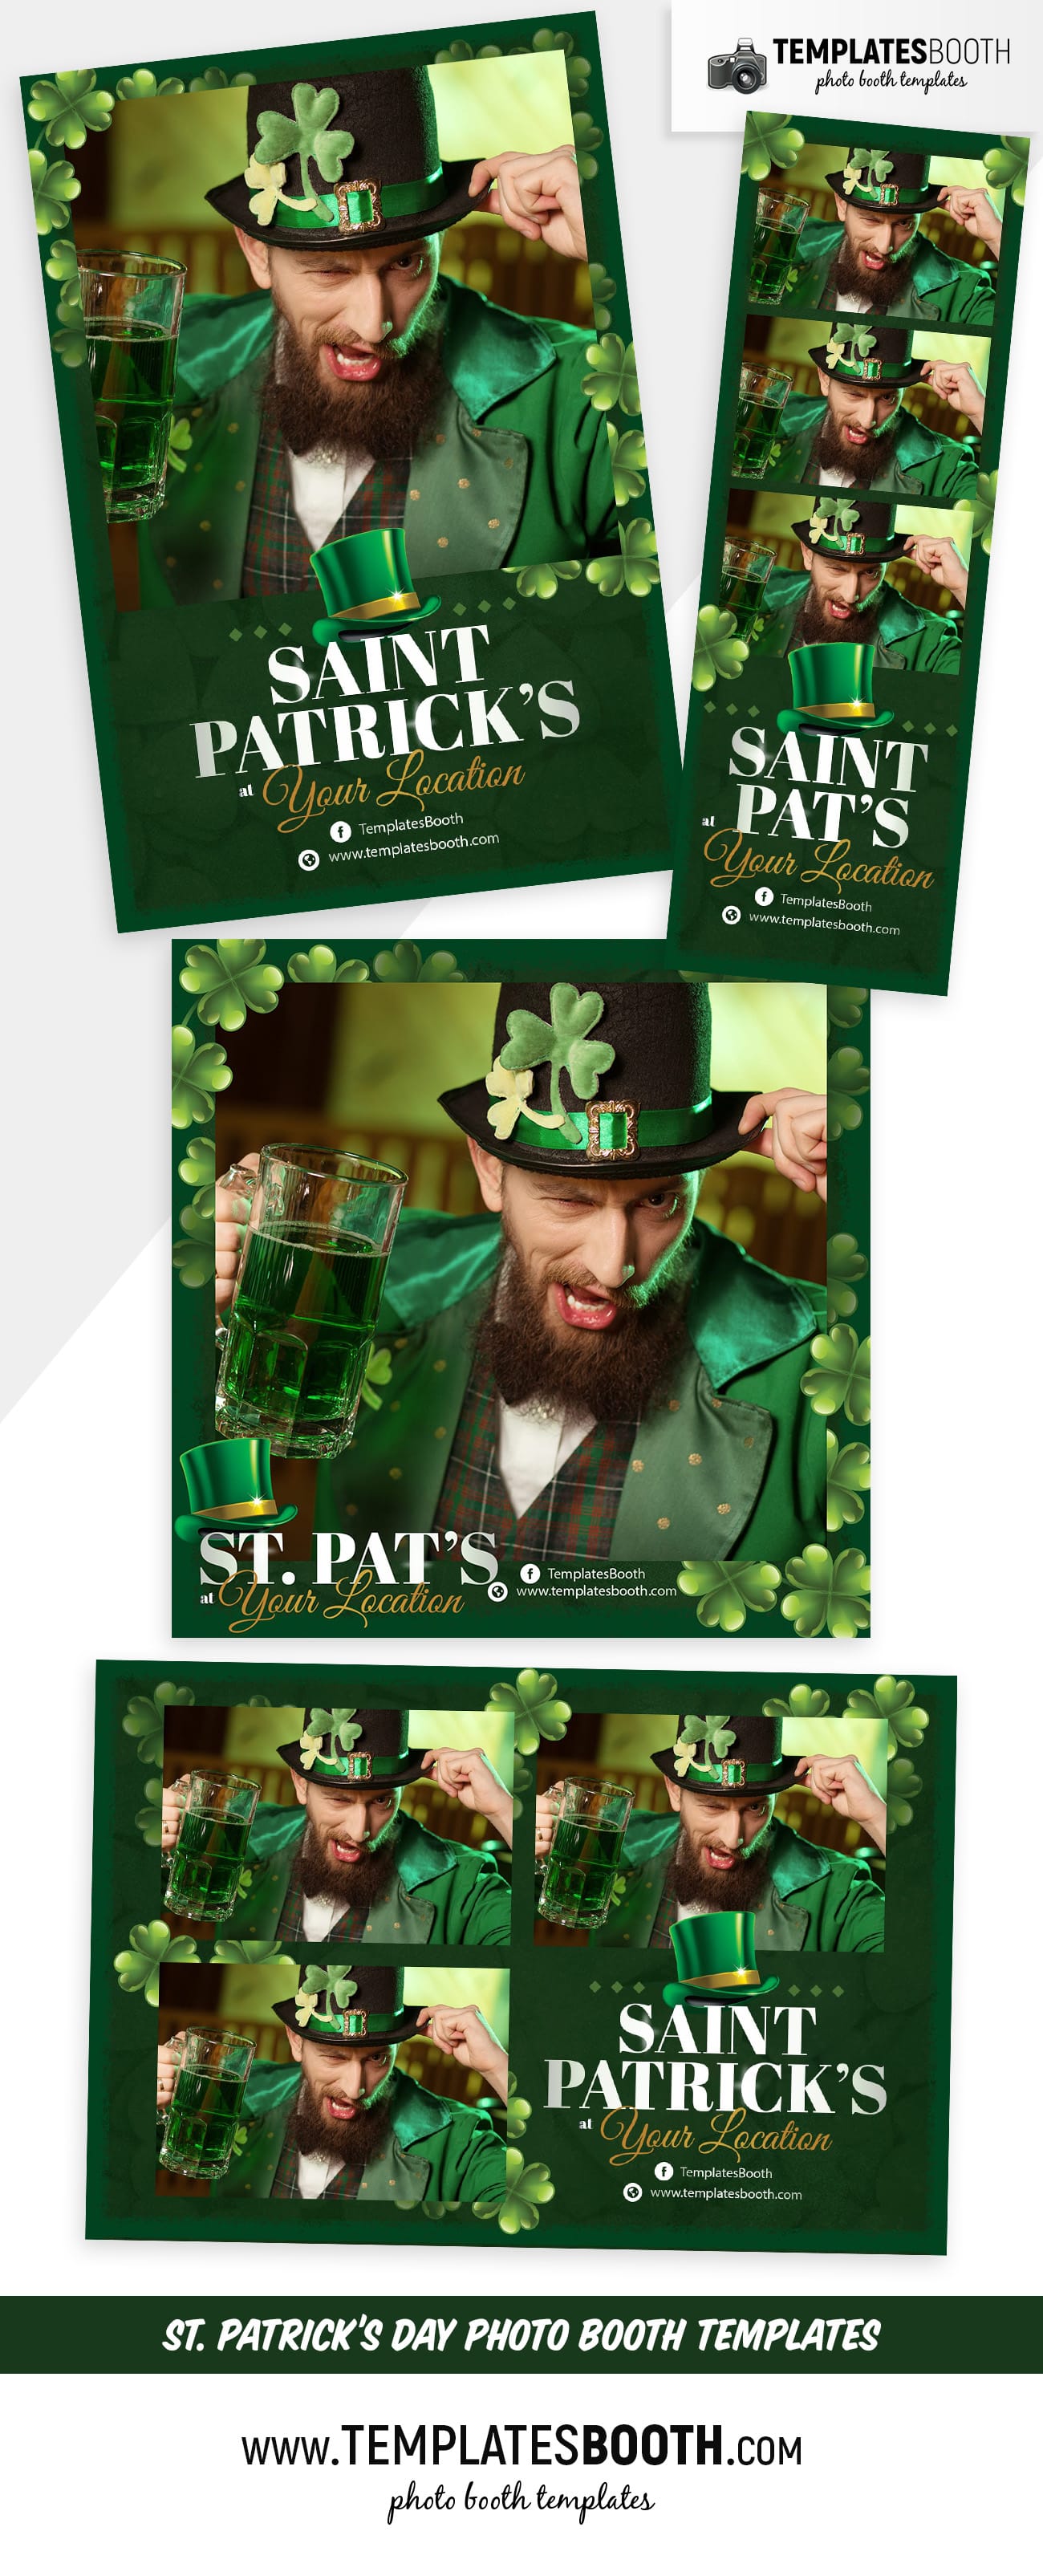 Saint Patrick's Day Photo Booth Template (full preview)